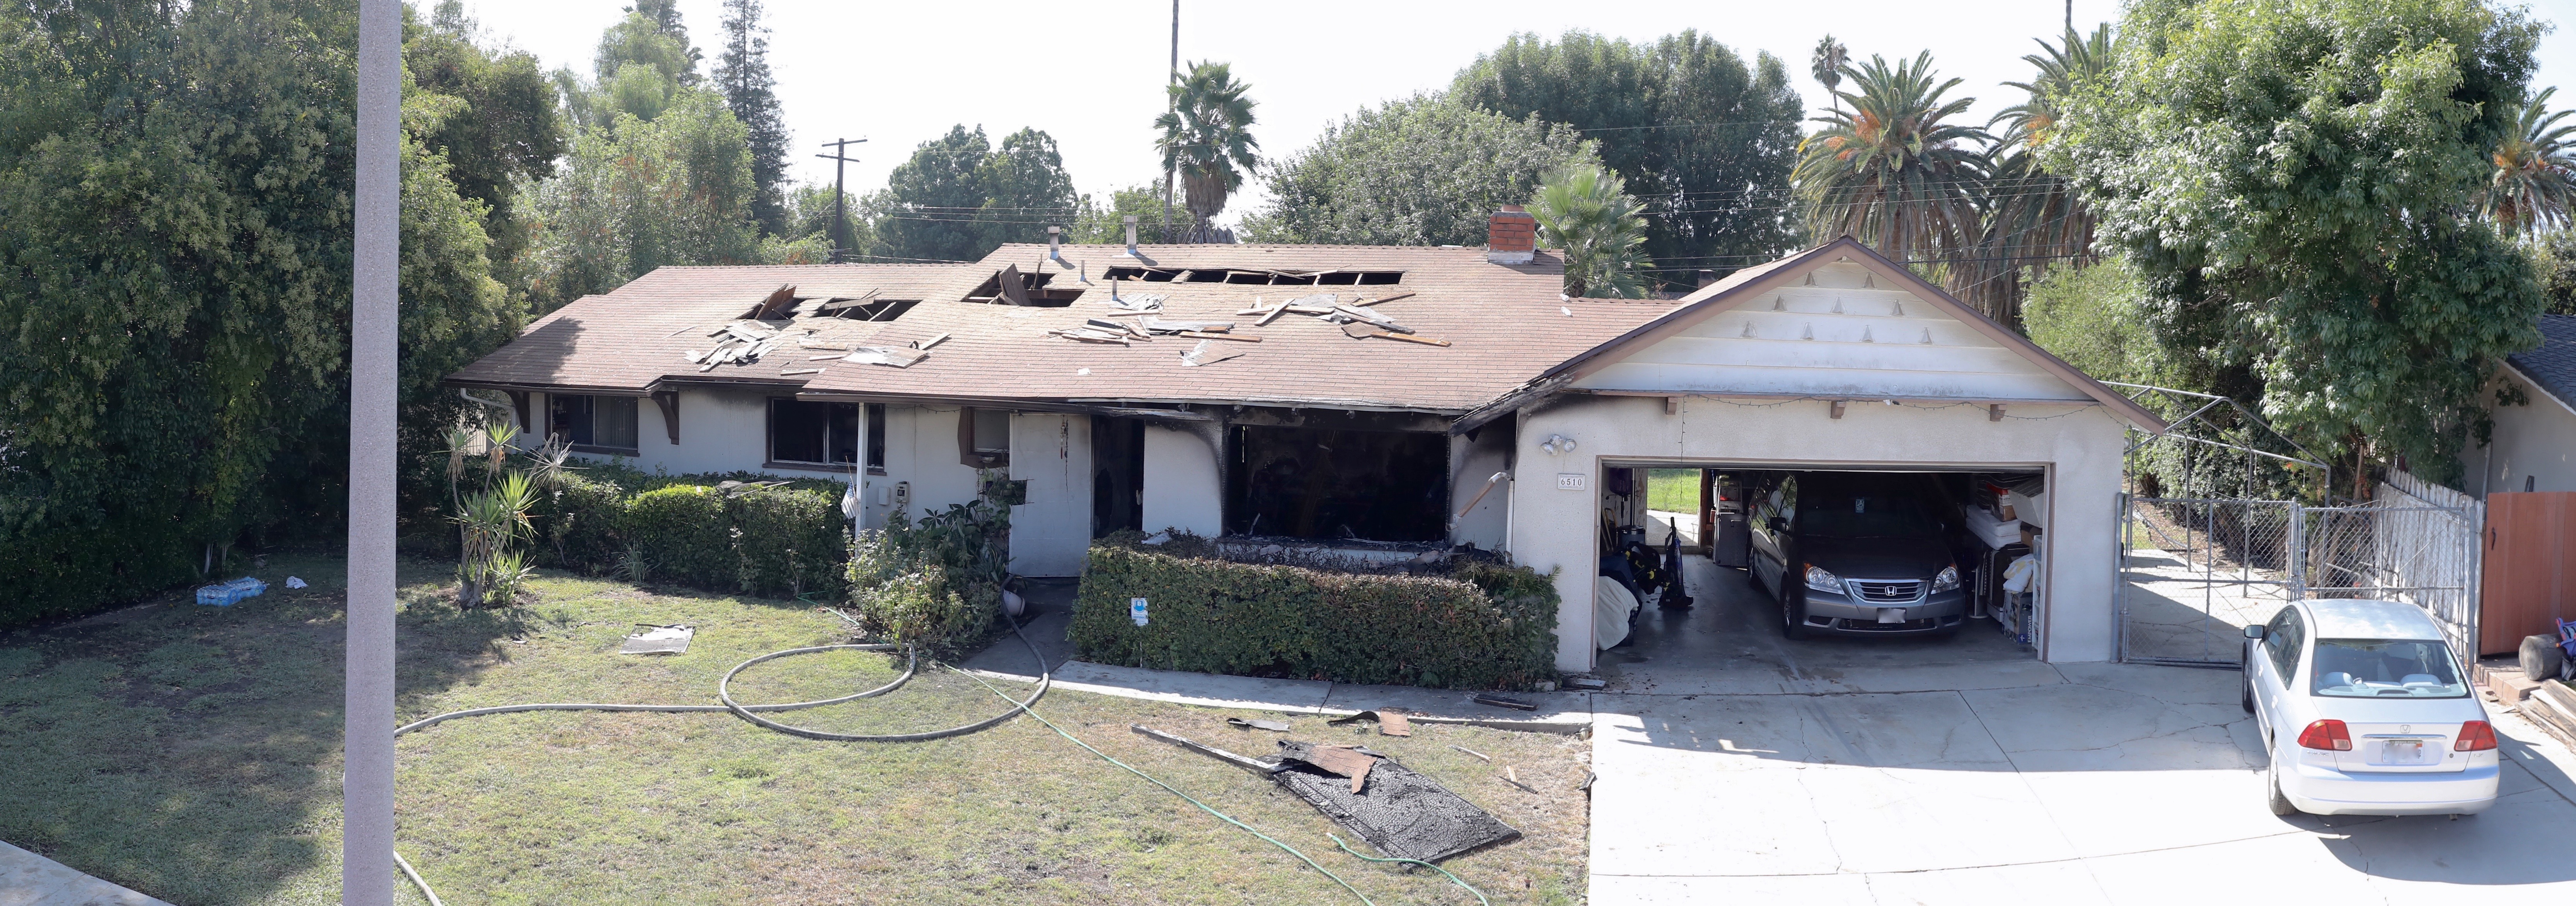 A man and woman were gravely injured at a fire in this West Hills home